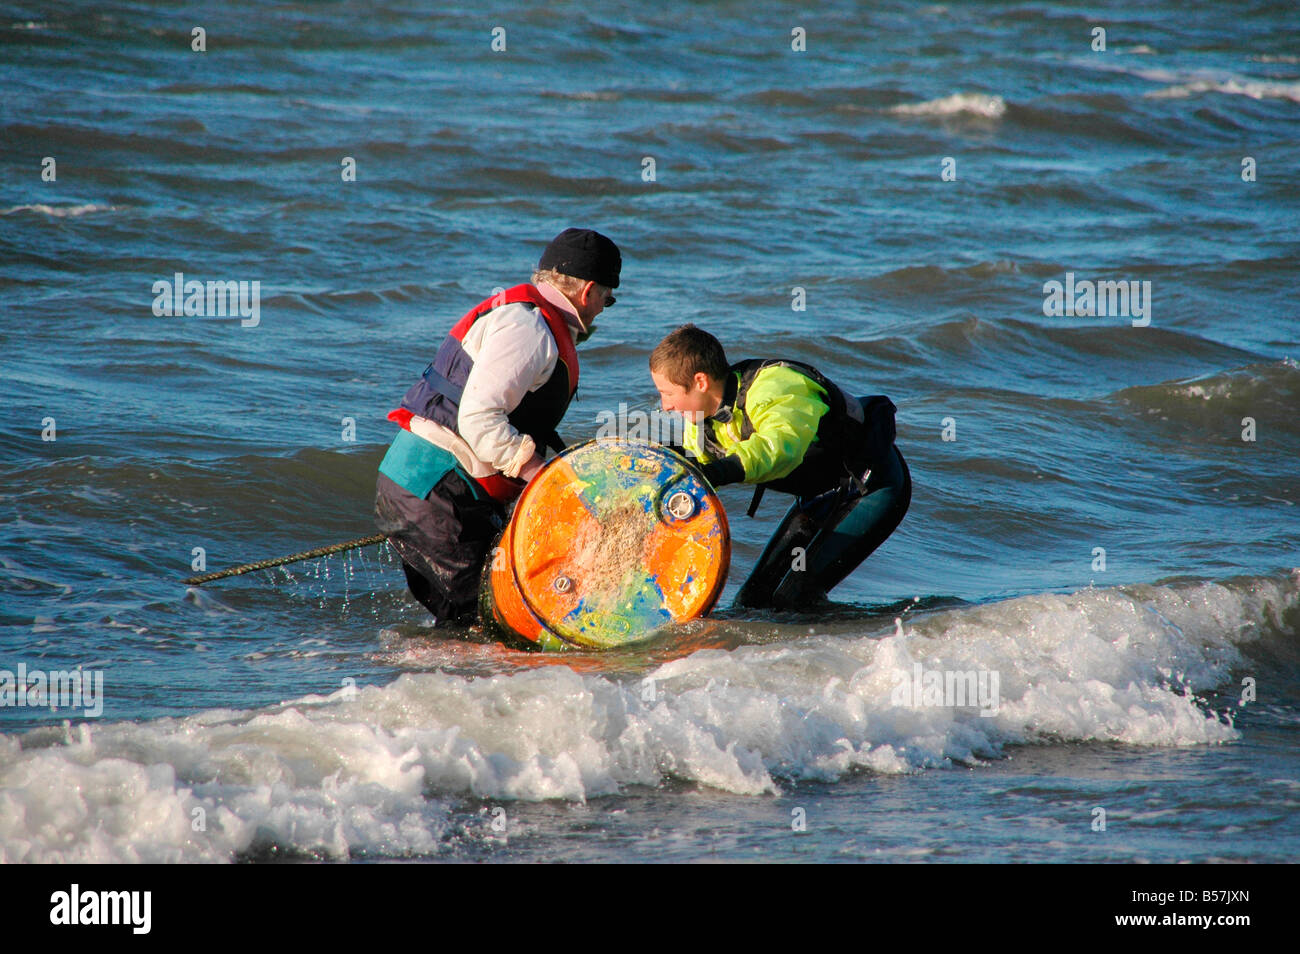 A boy and man bring in the buoys from the sea at the end of the sailing / dinghy season in Scotland. Stock Photo